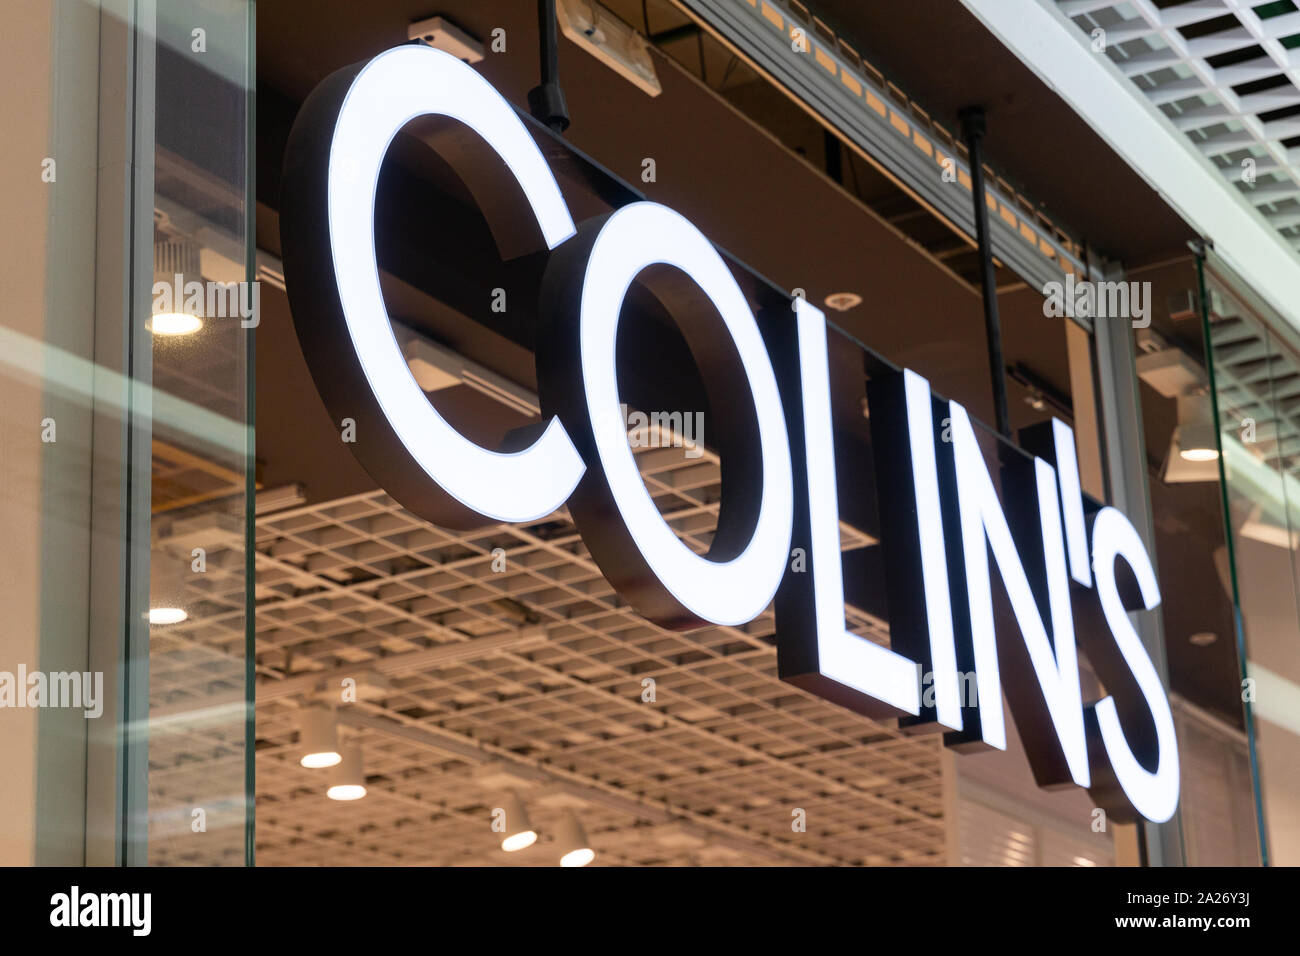 Minsk, Belarus - July 16, 2019: Colin's logo at the store facade. Collin's is mass market clothing brand. Stock Photo